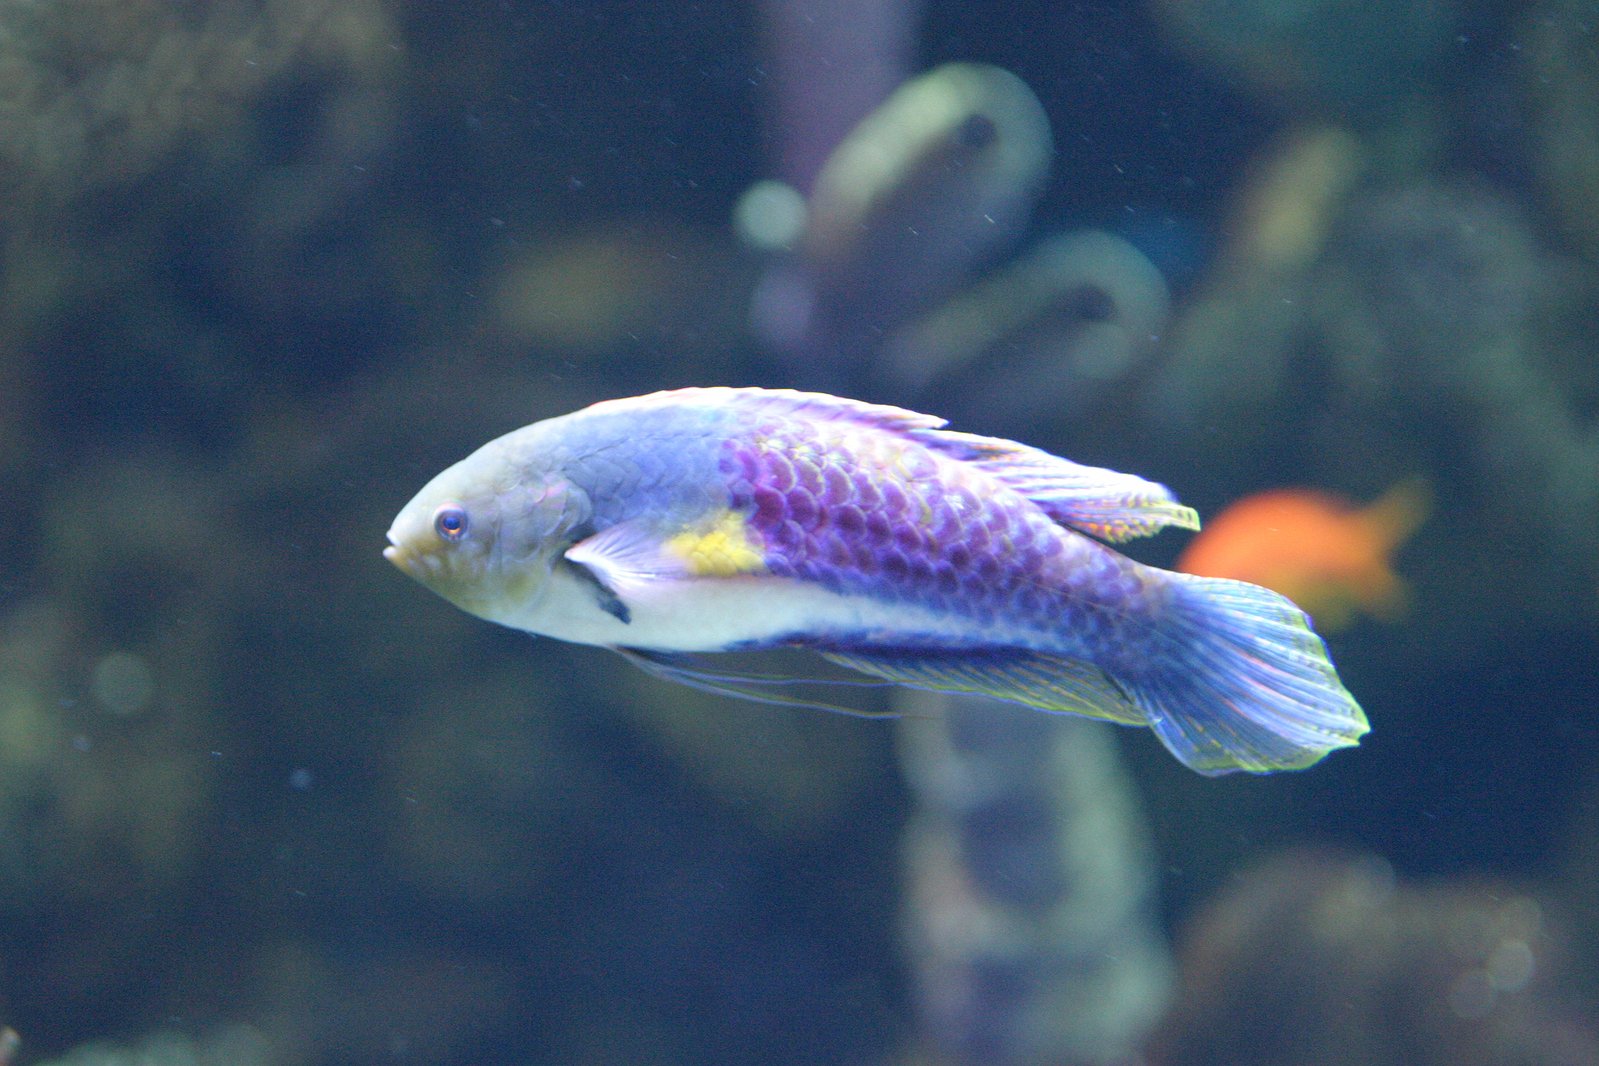 a blue and yellow fish with white spots